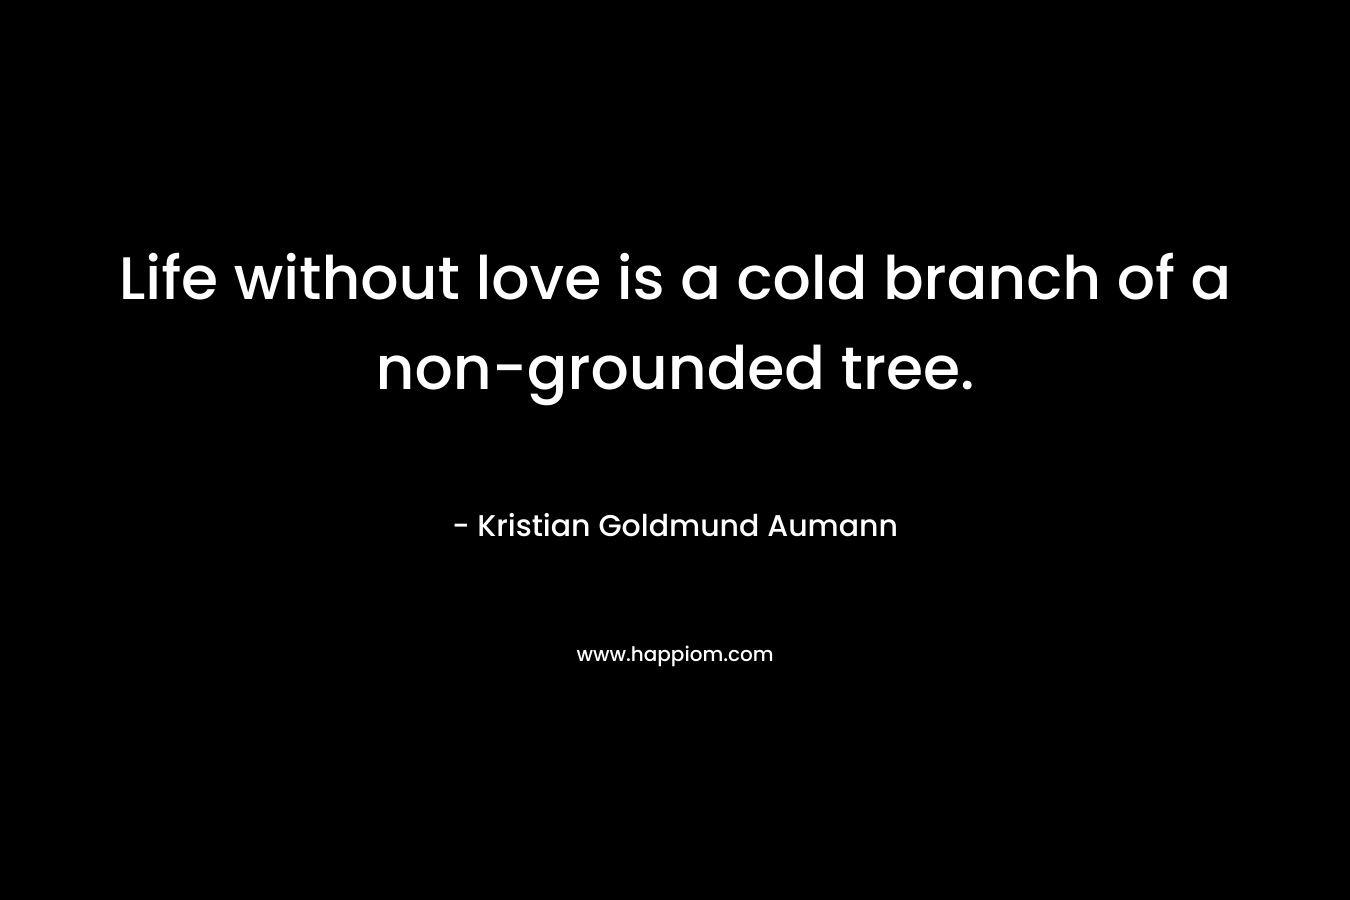 Life without love is a cold branch of a non-grounded tree. – Kristian Goldmund Aumann